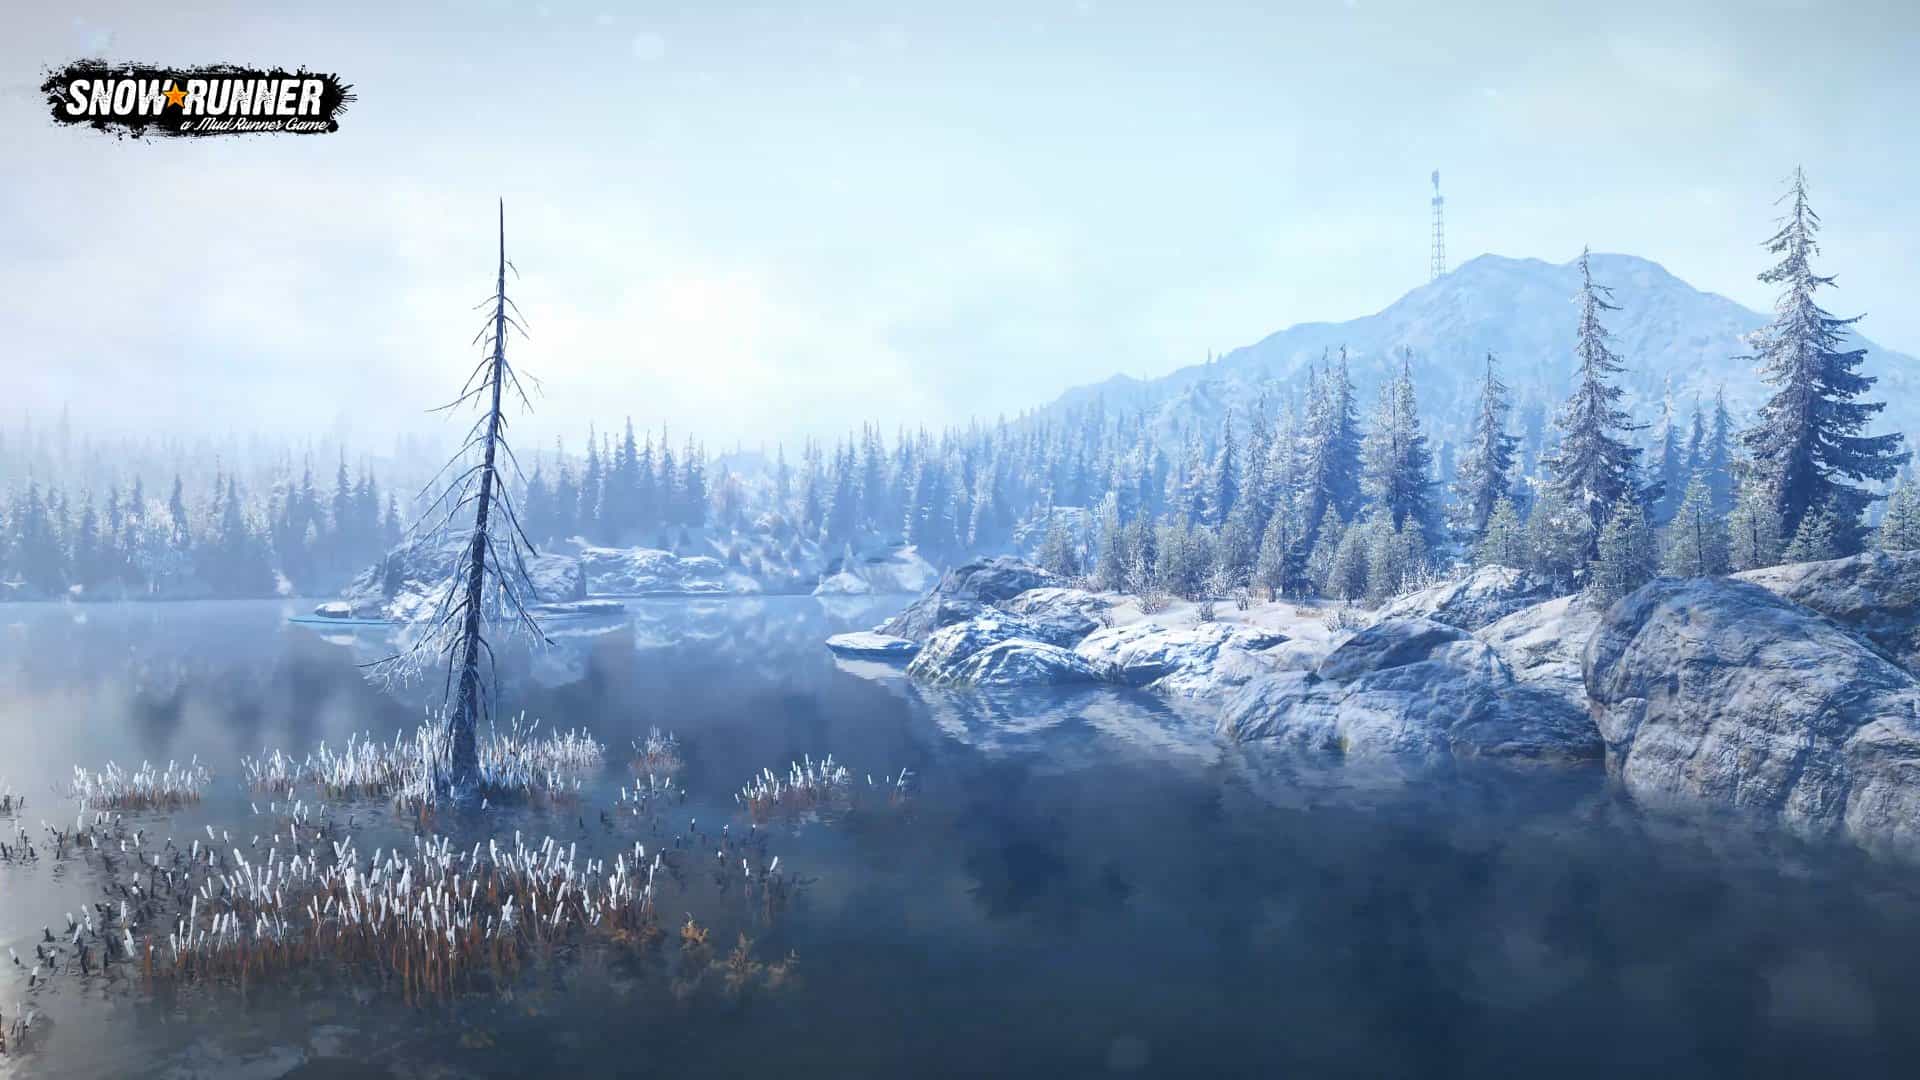 Russia and the US nature in Snowrunner game. SnowRunner Mods for PC